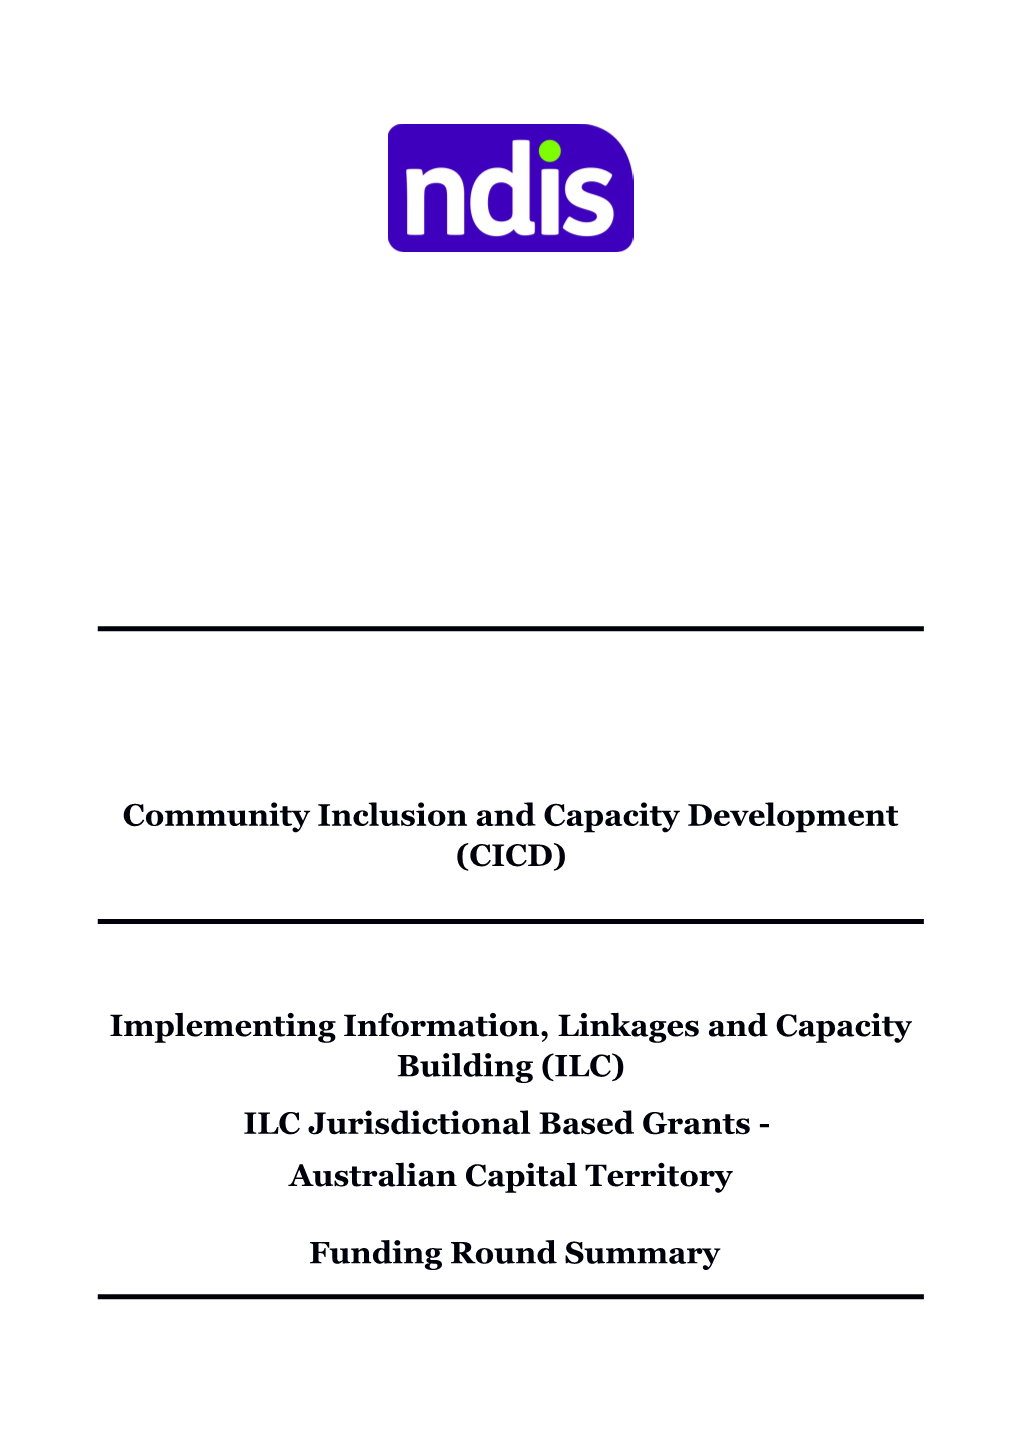 Community Inclusion and Capacity Development (CICD)